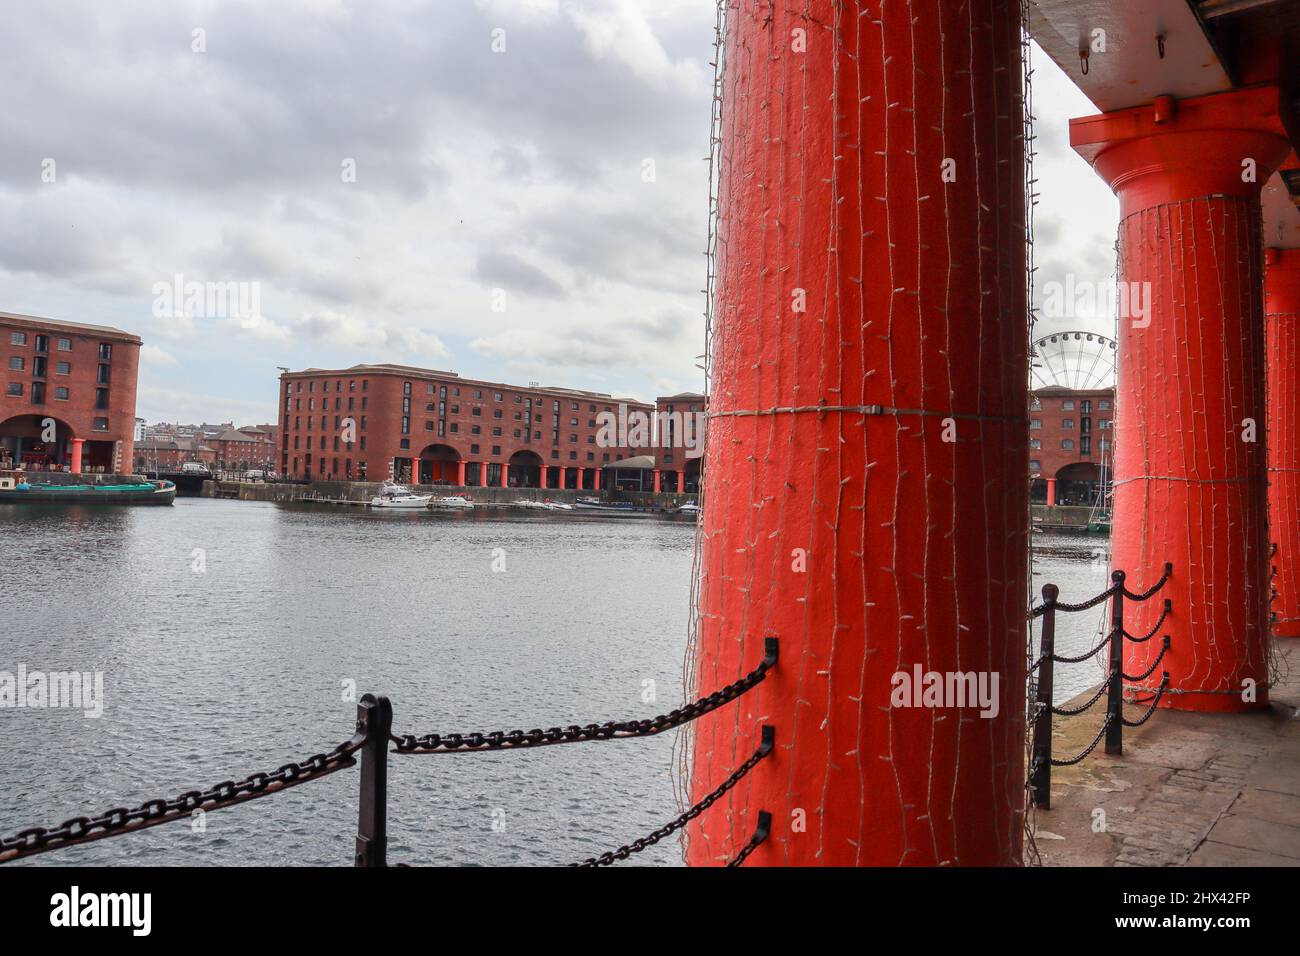 Looking out across the dock at the Royal Albert Dock, Liverpool Stock Photo